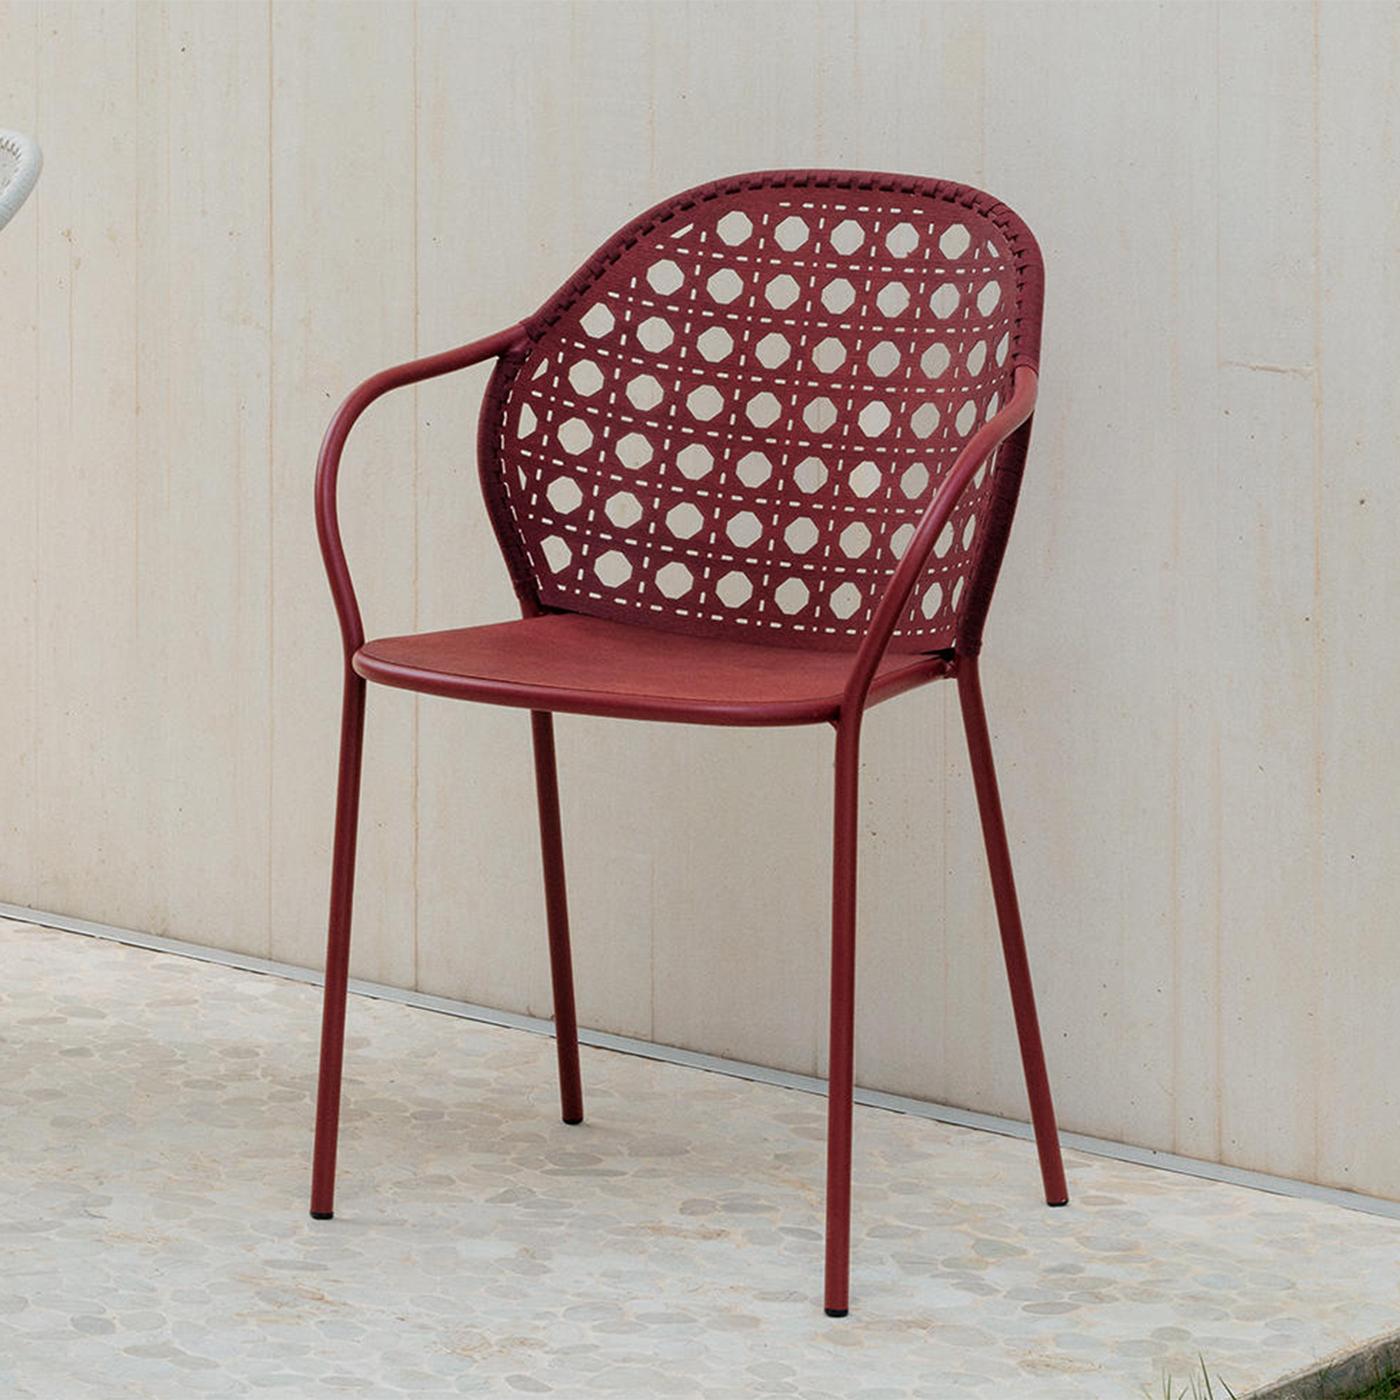 Chair Vick arm outdoor with frame structure in stainless steel
in coral finish, chair with armrests with seat and backrest made 
in outdoor wood in coral finish. Stackable chairs.
Also available on request in white finish.